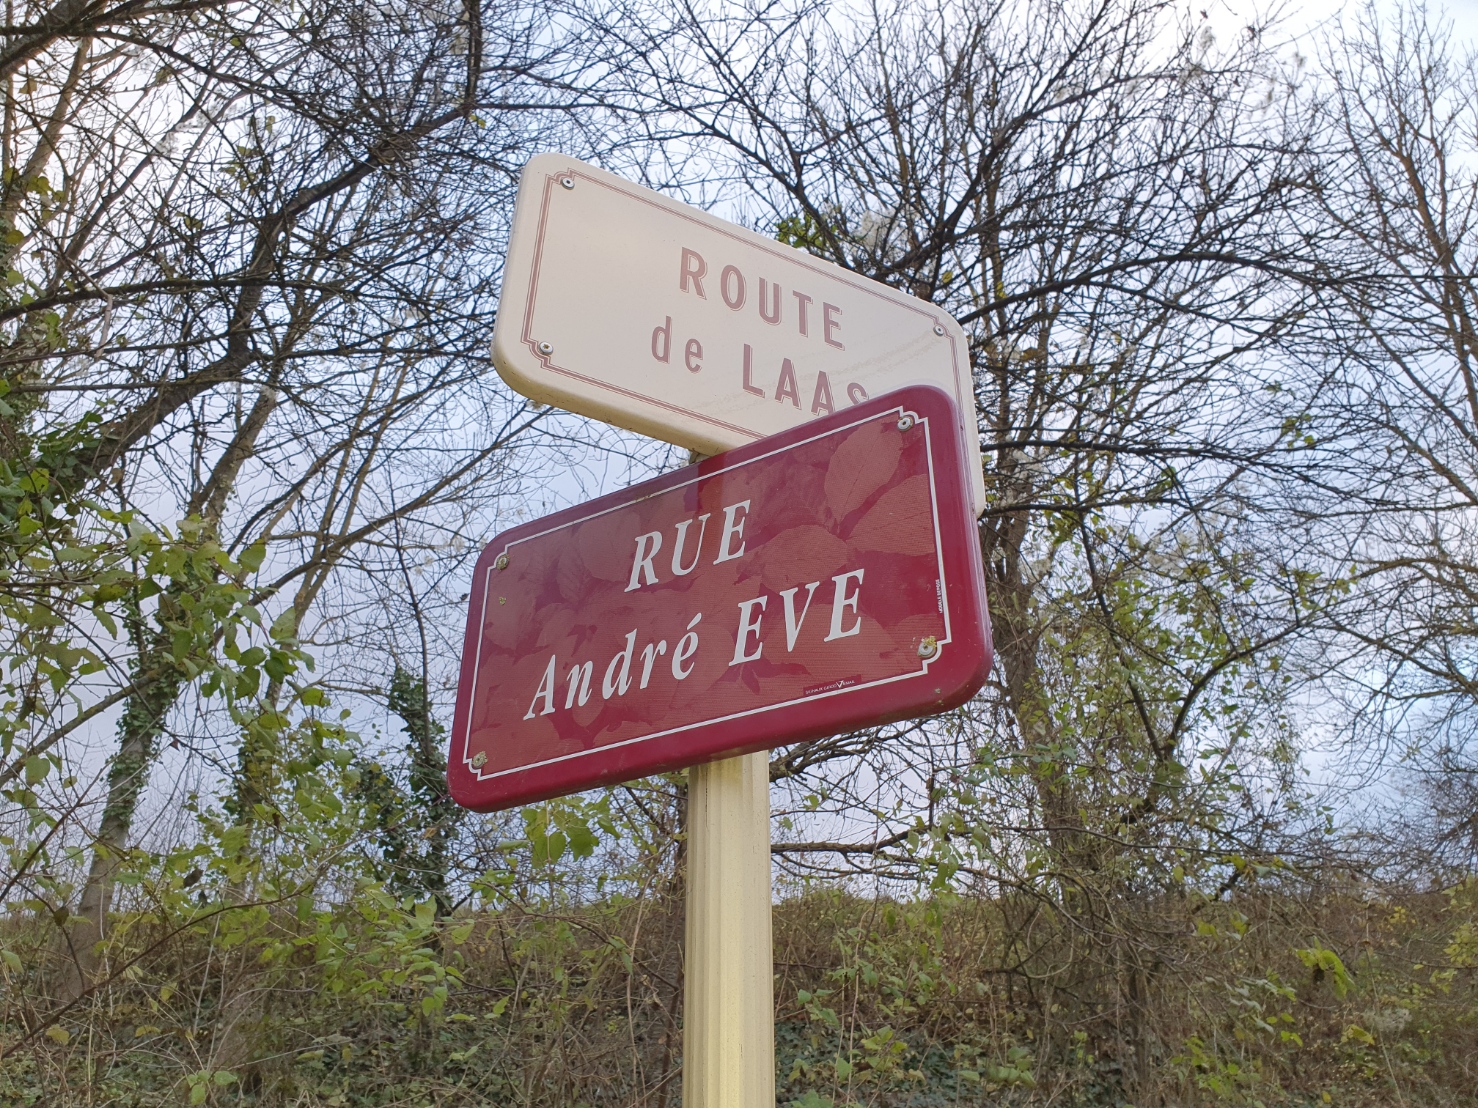 Rue André Eve